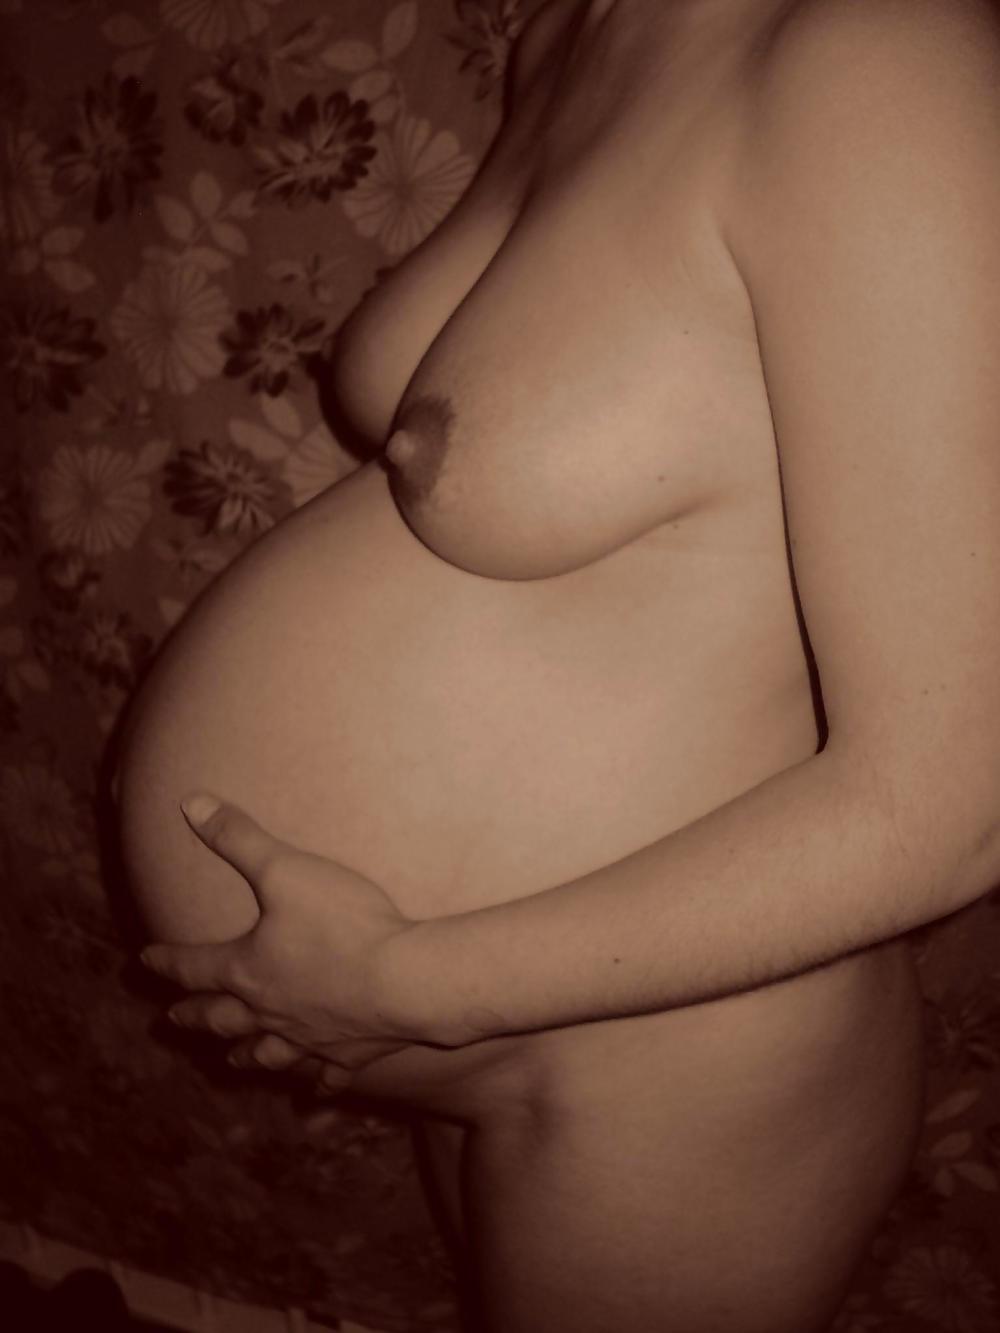 Ultimate Pregnant 3 adult photos